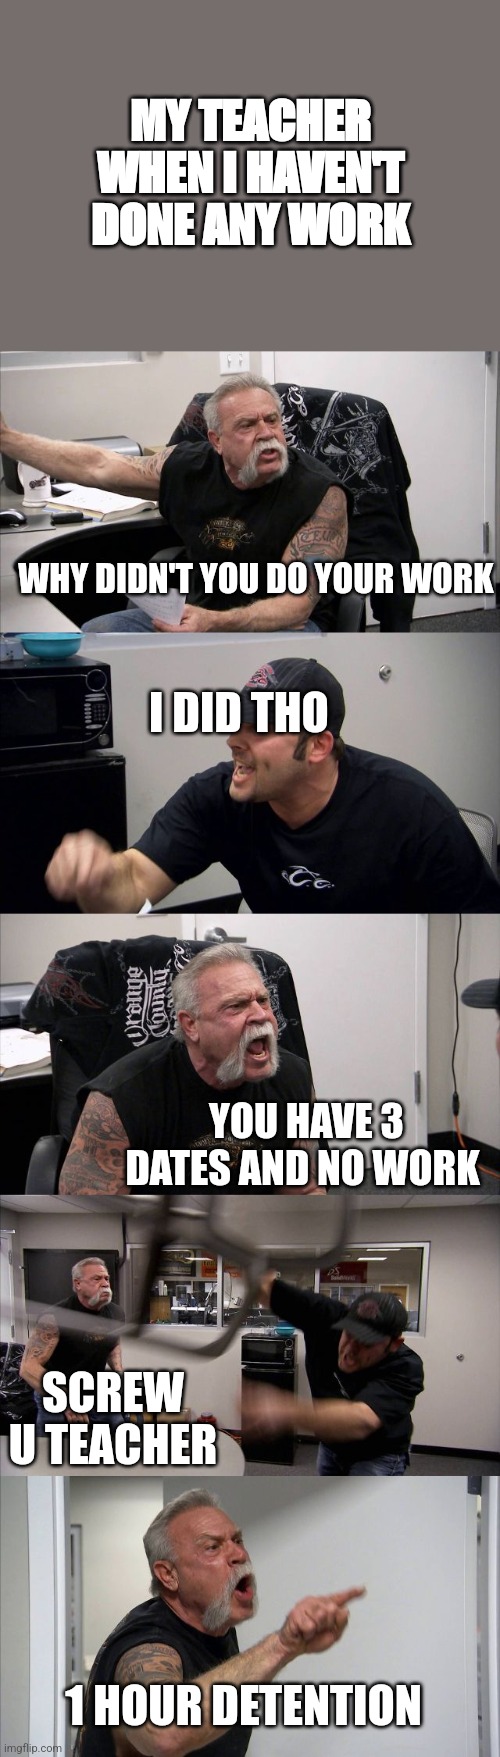 American Chopper Argument Meme | MY TEACHER WHEN I HAVEN'T DONE ANY WORK; WHY DIDN'T YOU DO YOUR WORK; I DID THO; YOU HAVE 3 DATES AND NO WORK; SCREW U TEACHER; 1 HOUR DETENTION | image tagged in memes,american chopper argument | made w/ Imgflip meme maker